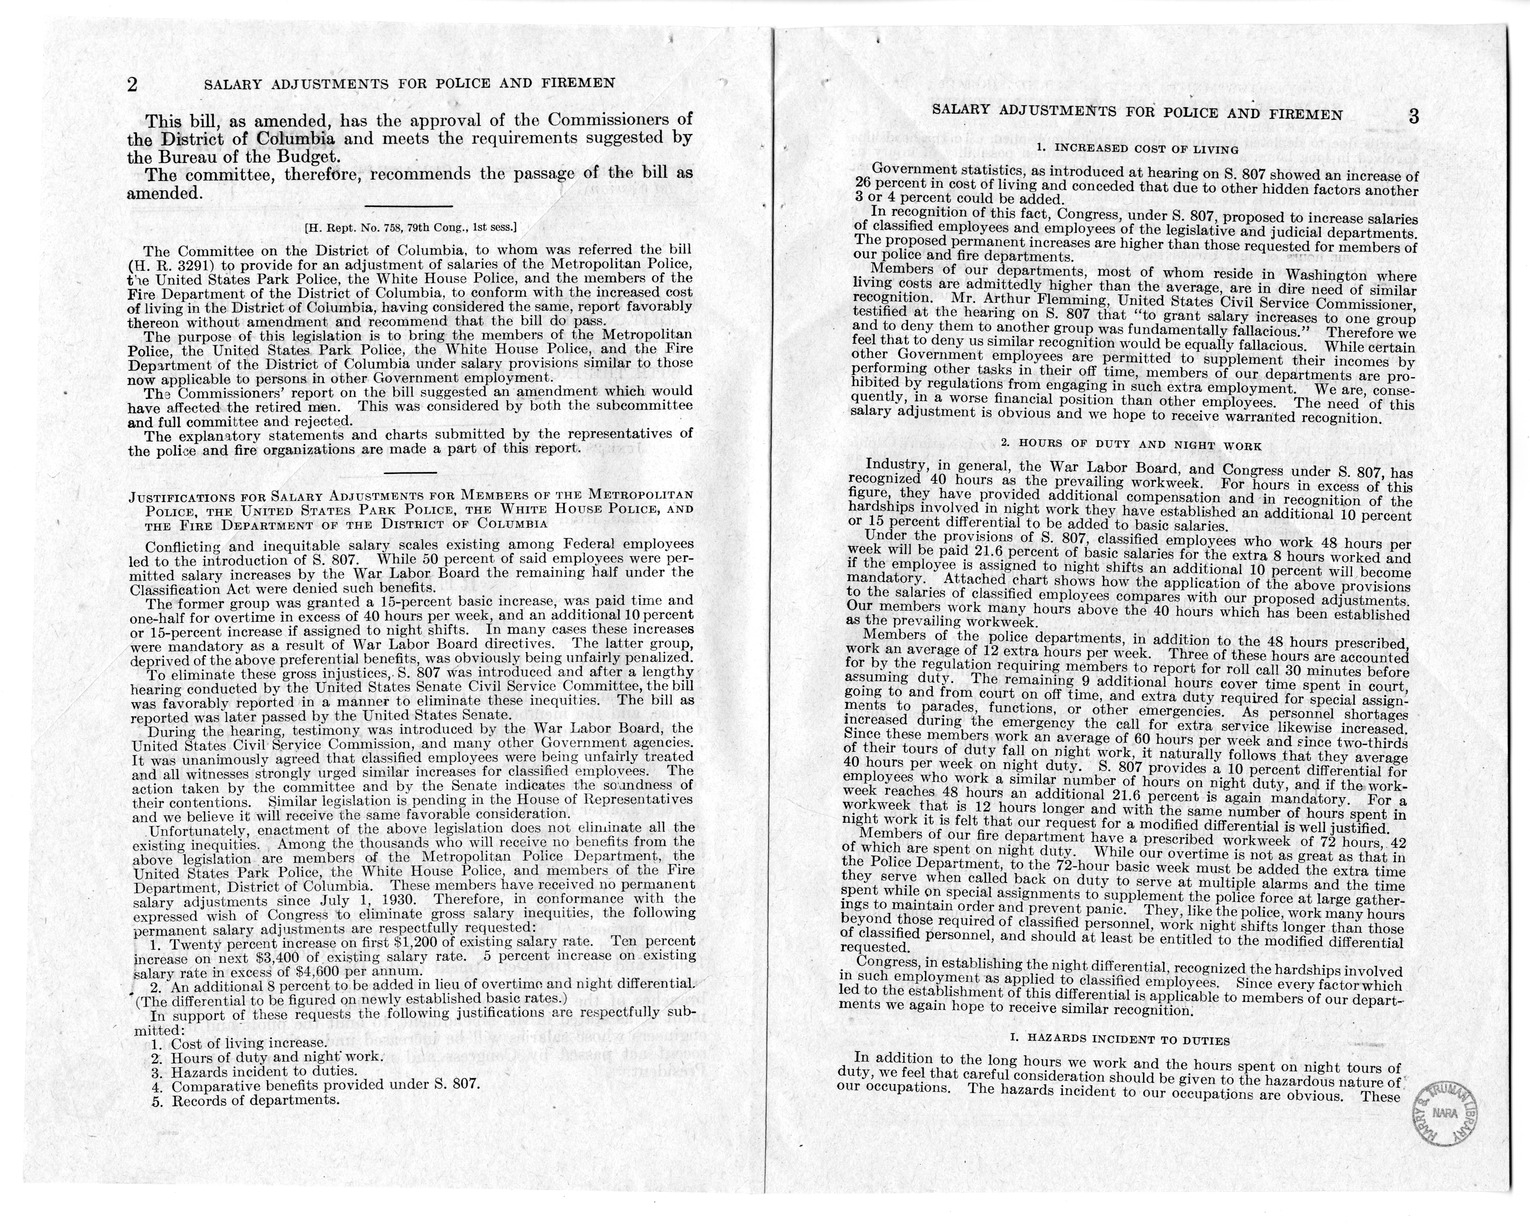 Memorandum from Harold D. Smith to M. C. Latta, H.R. 3291, To Provide for an Adjustment of Salaries of the Metropolitan Police, the United States Park Police, the White House Police, and the Members of the Fire Department of the District of Columbia, with